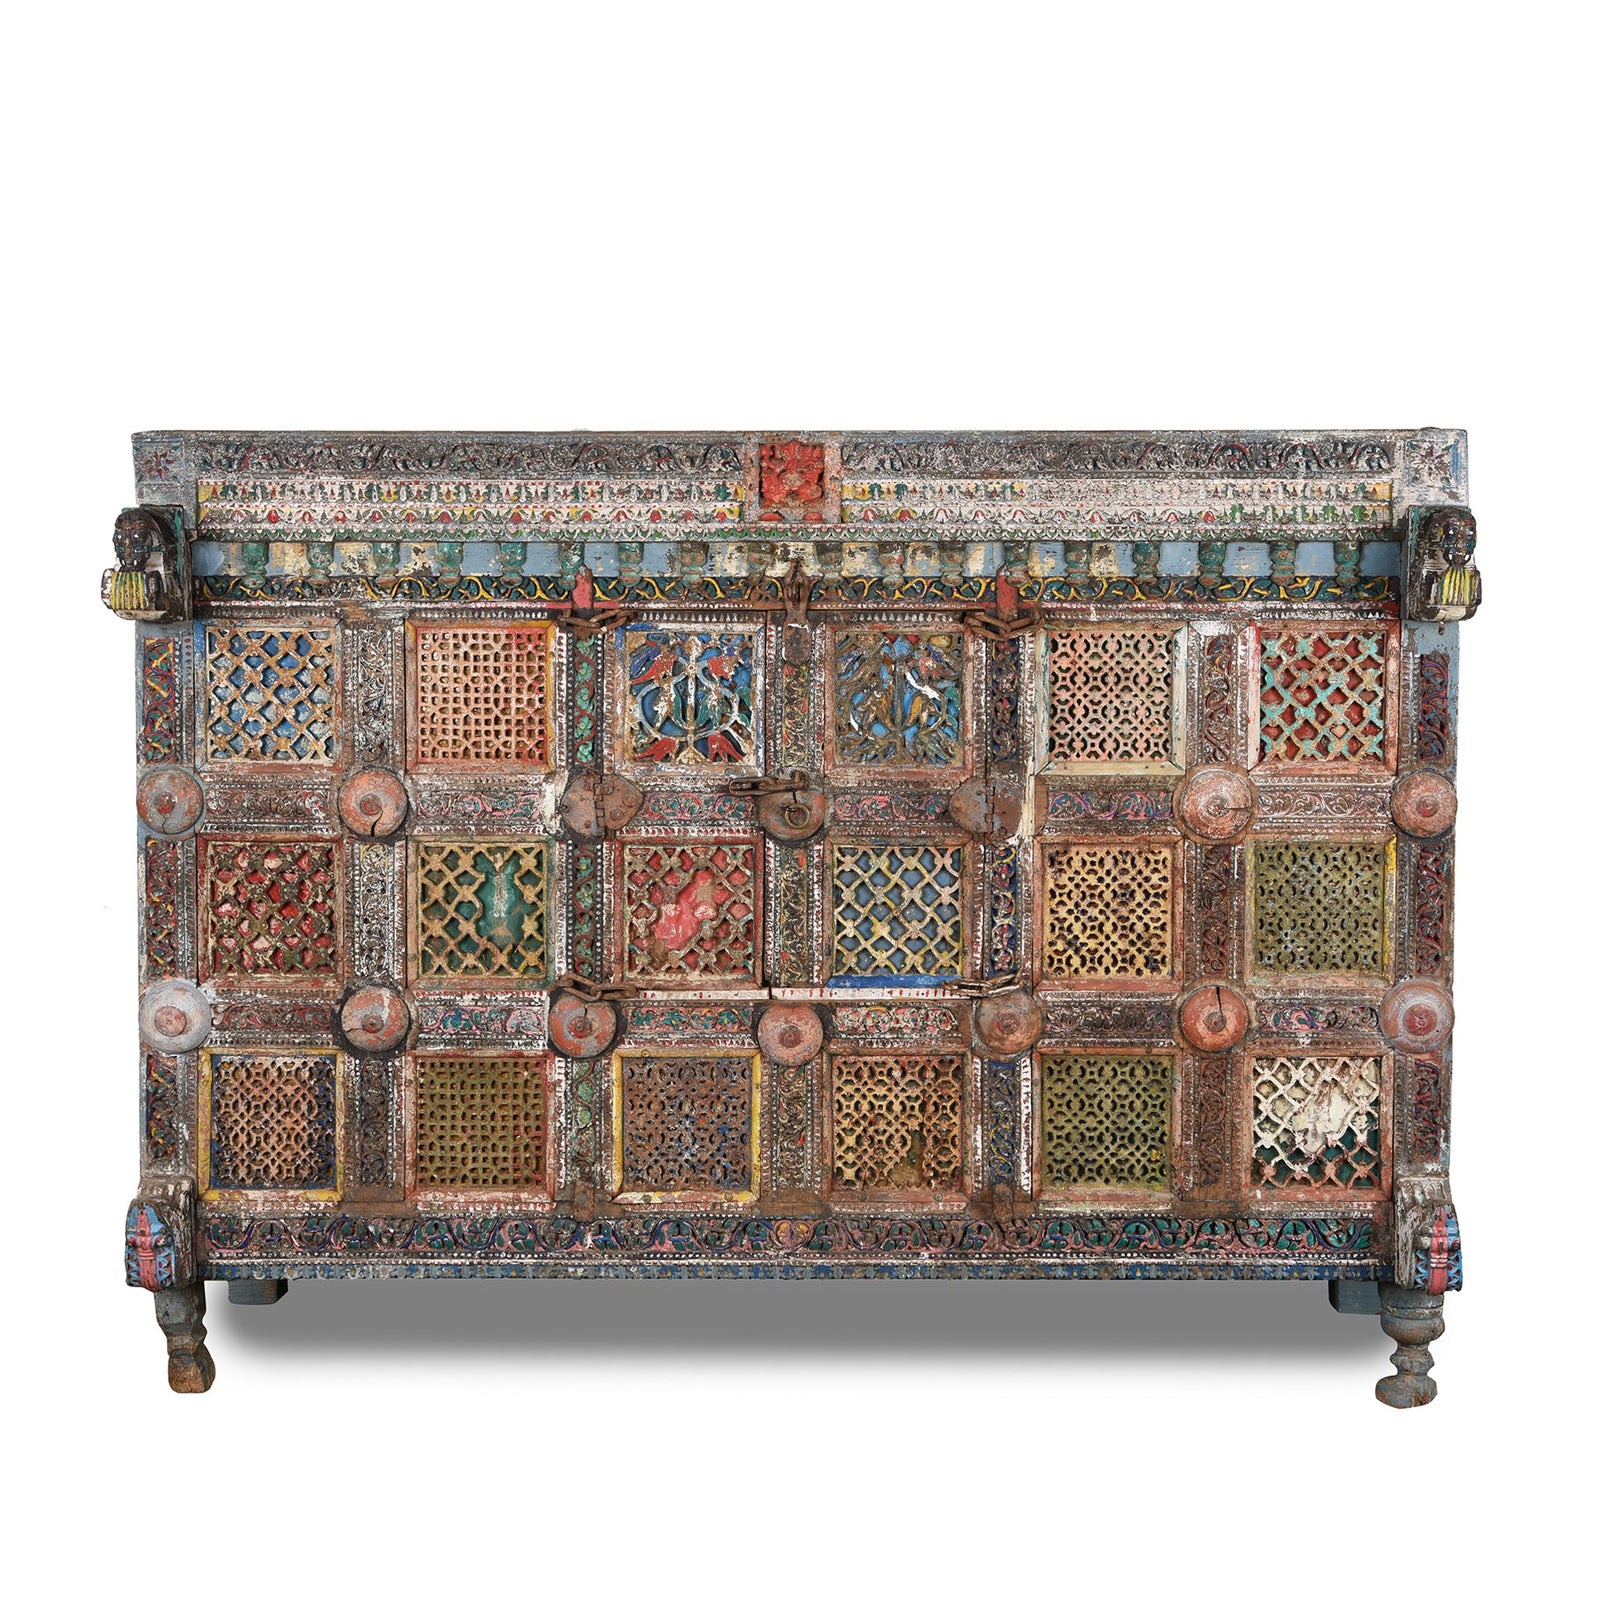 A dramatic painted Indian Damchiya dowry chest  with beautifully painted Indian mirrors and lota.